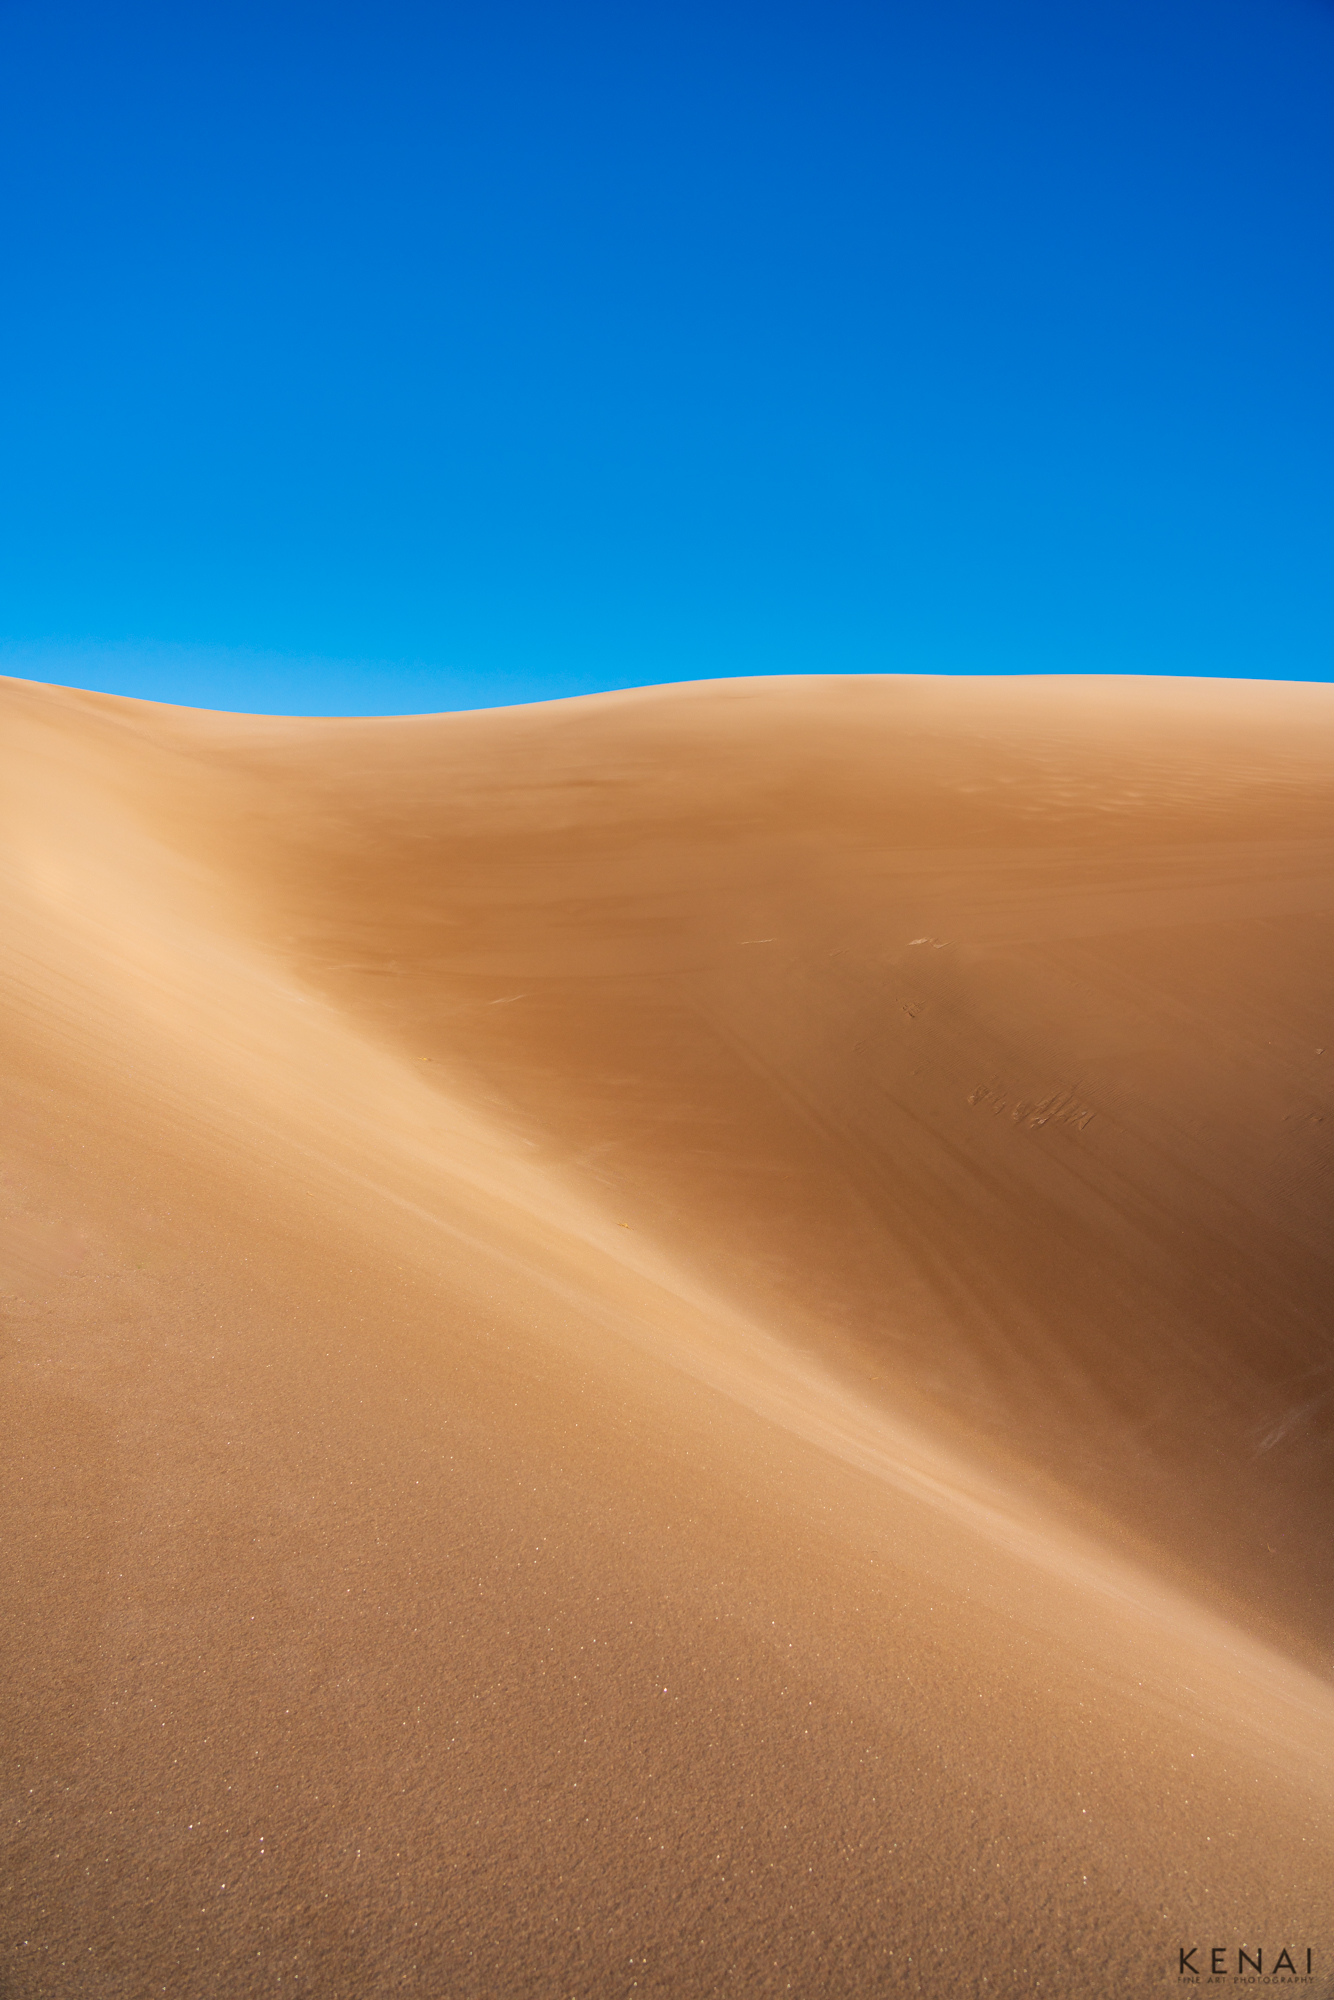 Textured, golden sand under a bright blue sky in Great Sand Dunes National Park, Colorado. 